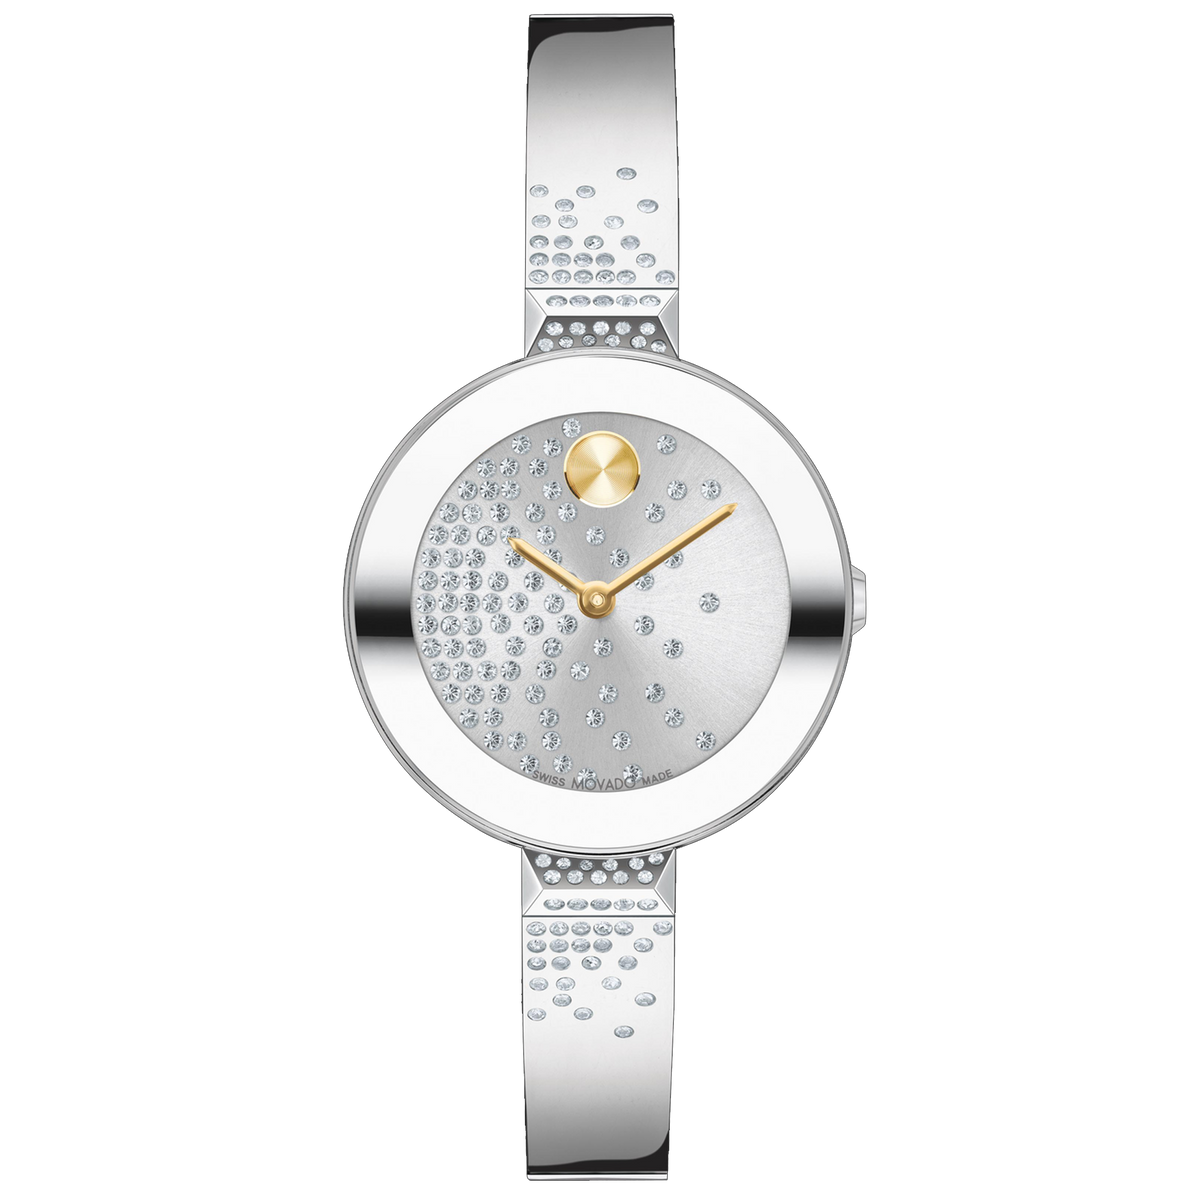 Movado Bold Bangle - 28mm Crystal &quot;Spray&quot;